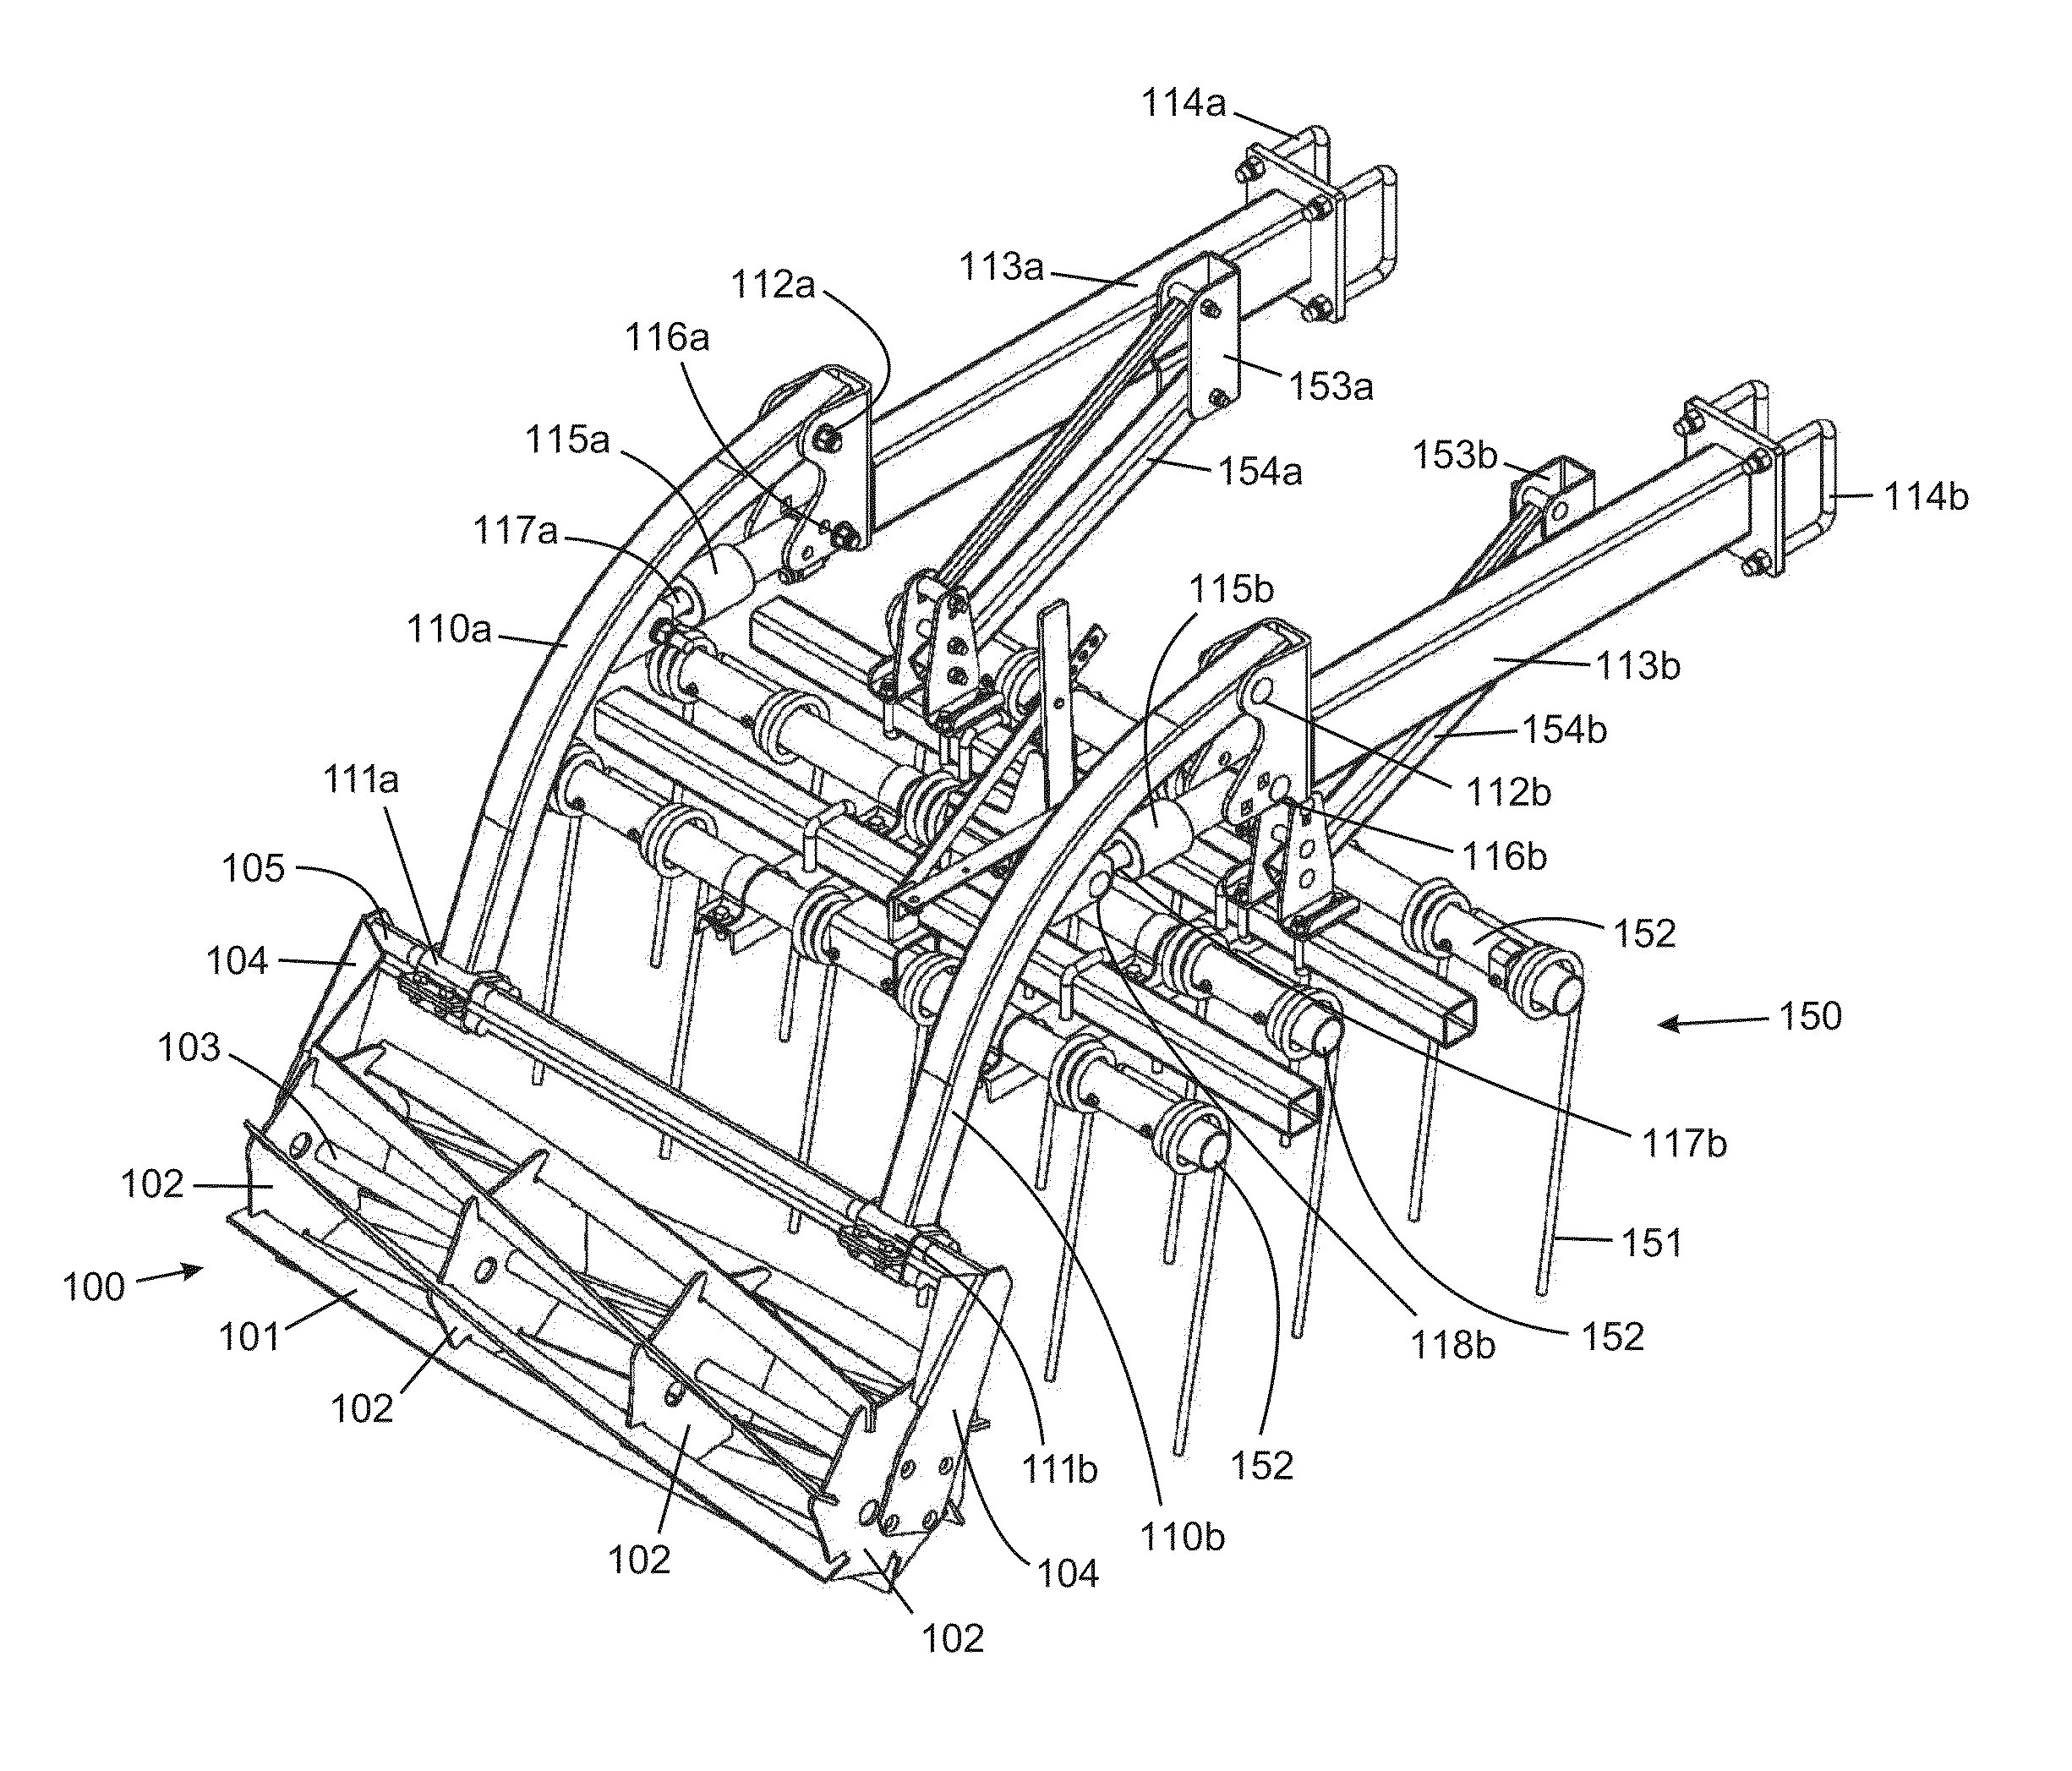 Hydraulically controlled rotary harrow for tillage apparatus and system